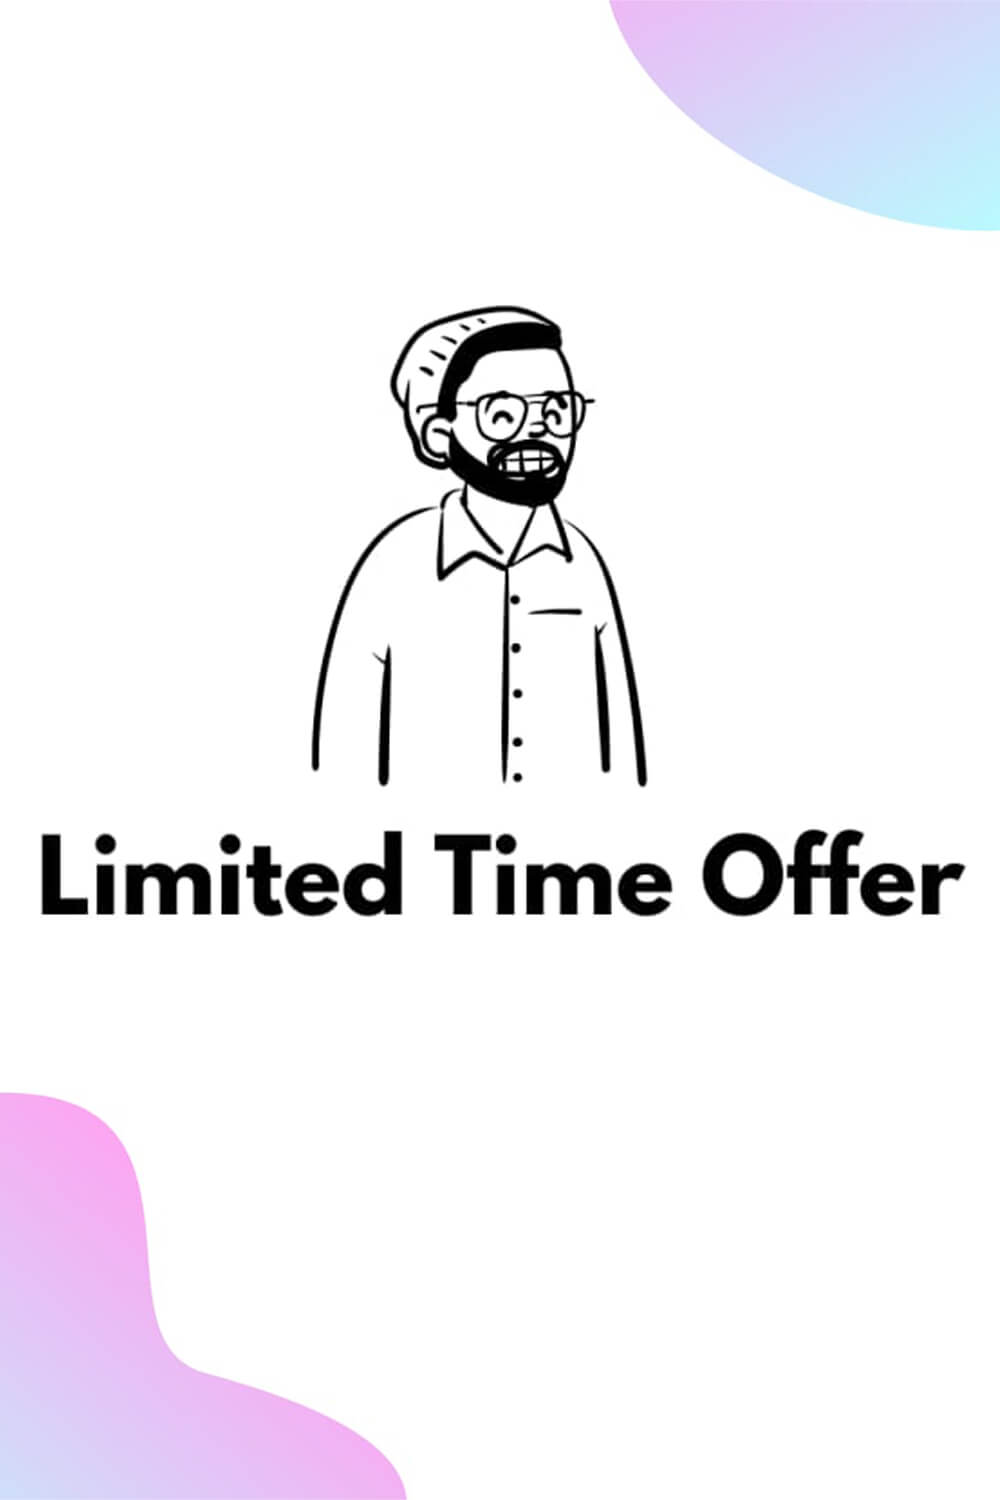 Inscription "Limited Time Offer" on the White Background.